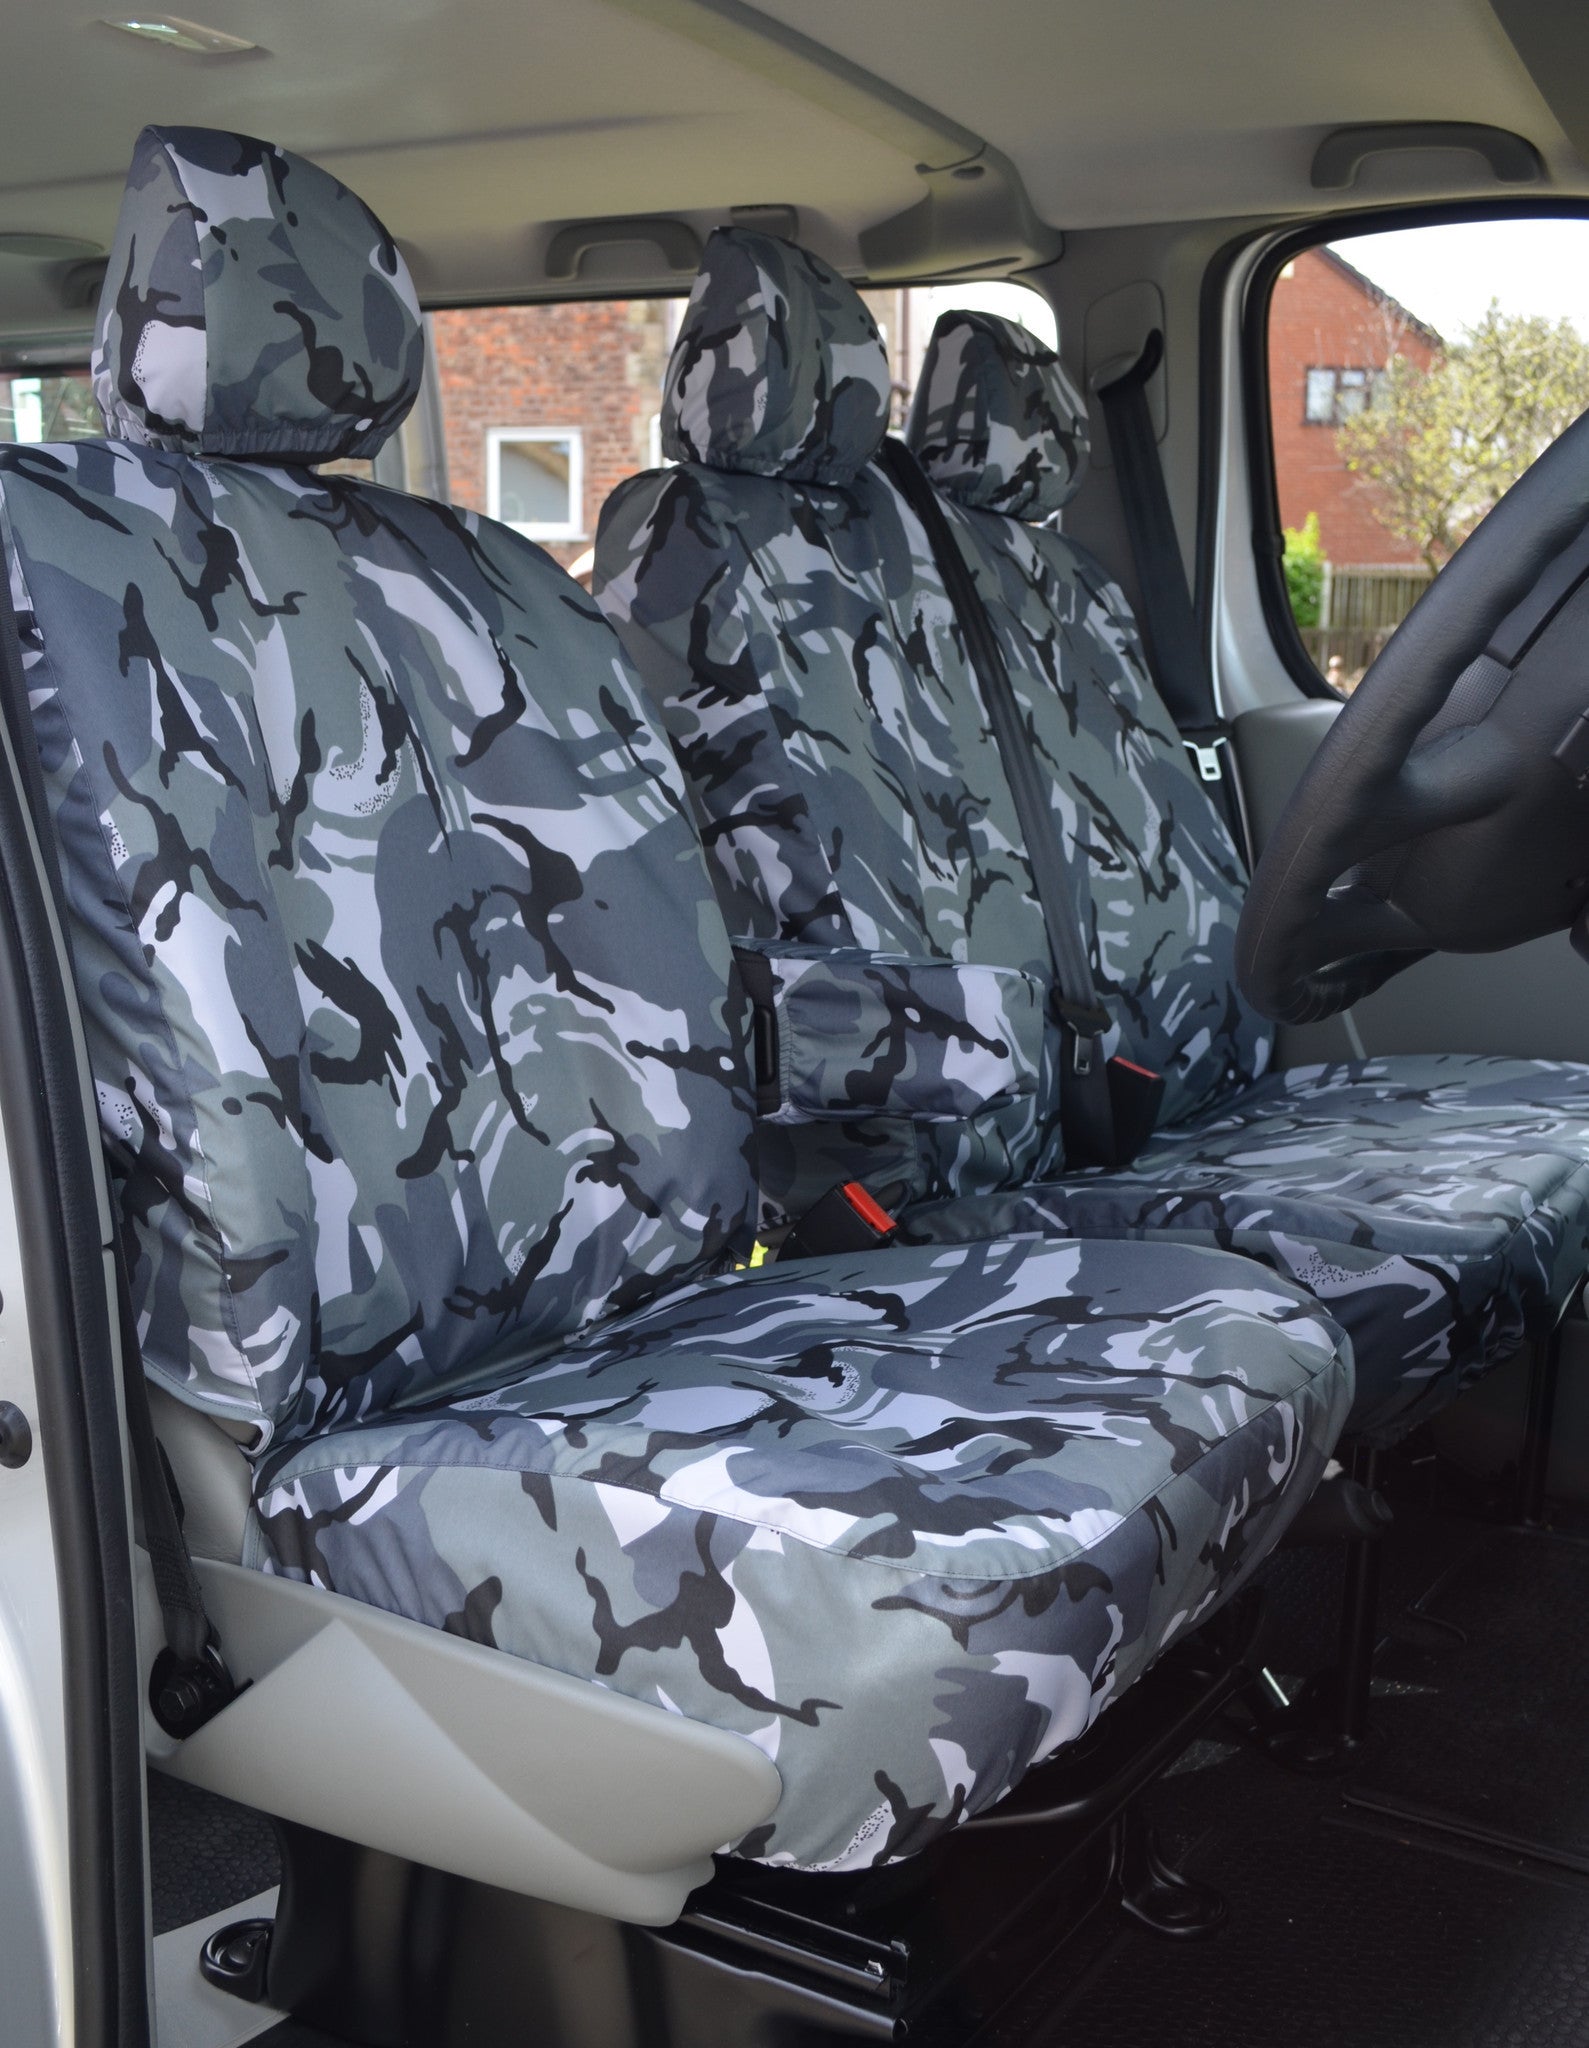 Nissan Primastar 2002 - 2006 Tailored Front Seat Covers Urban Camouflage / With Driver's Armrest Turtle Covers Ltd